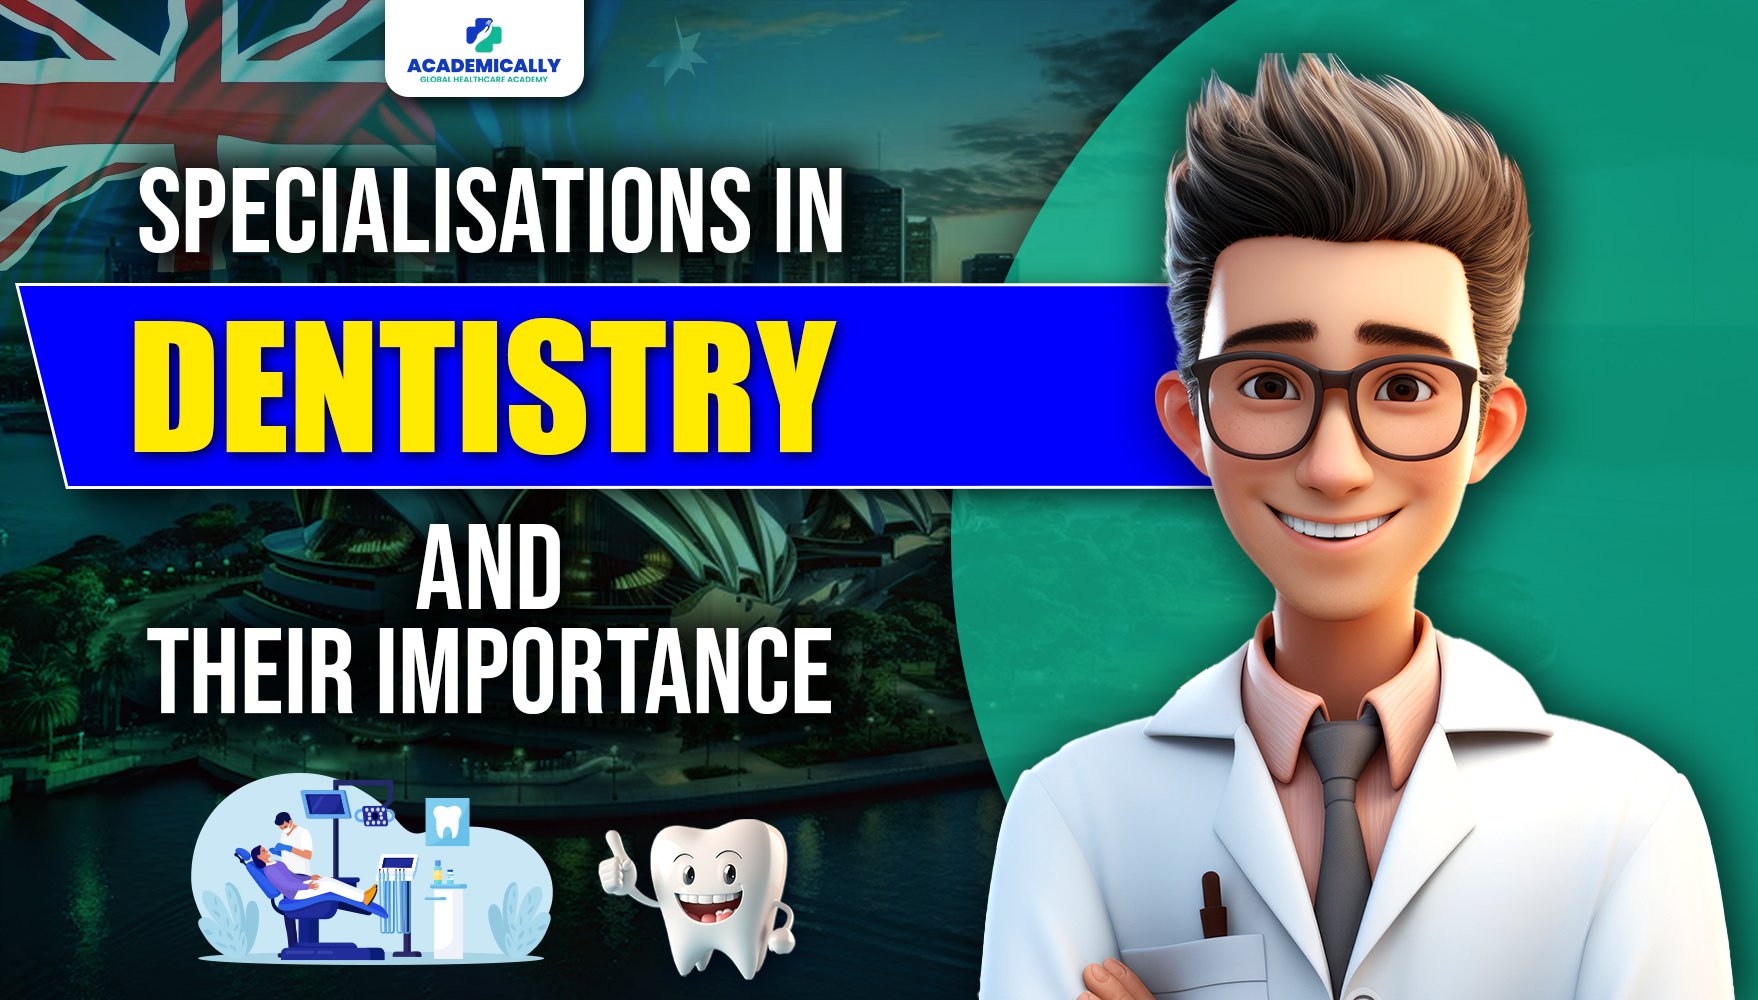 Specialisations in Dentistry